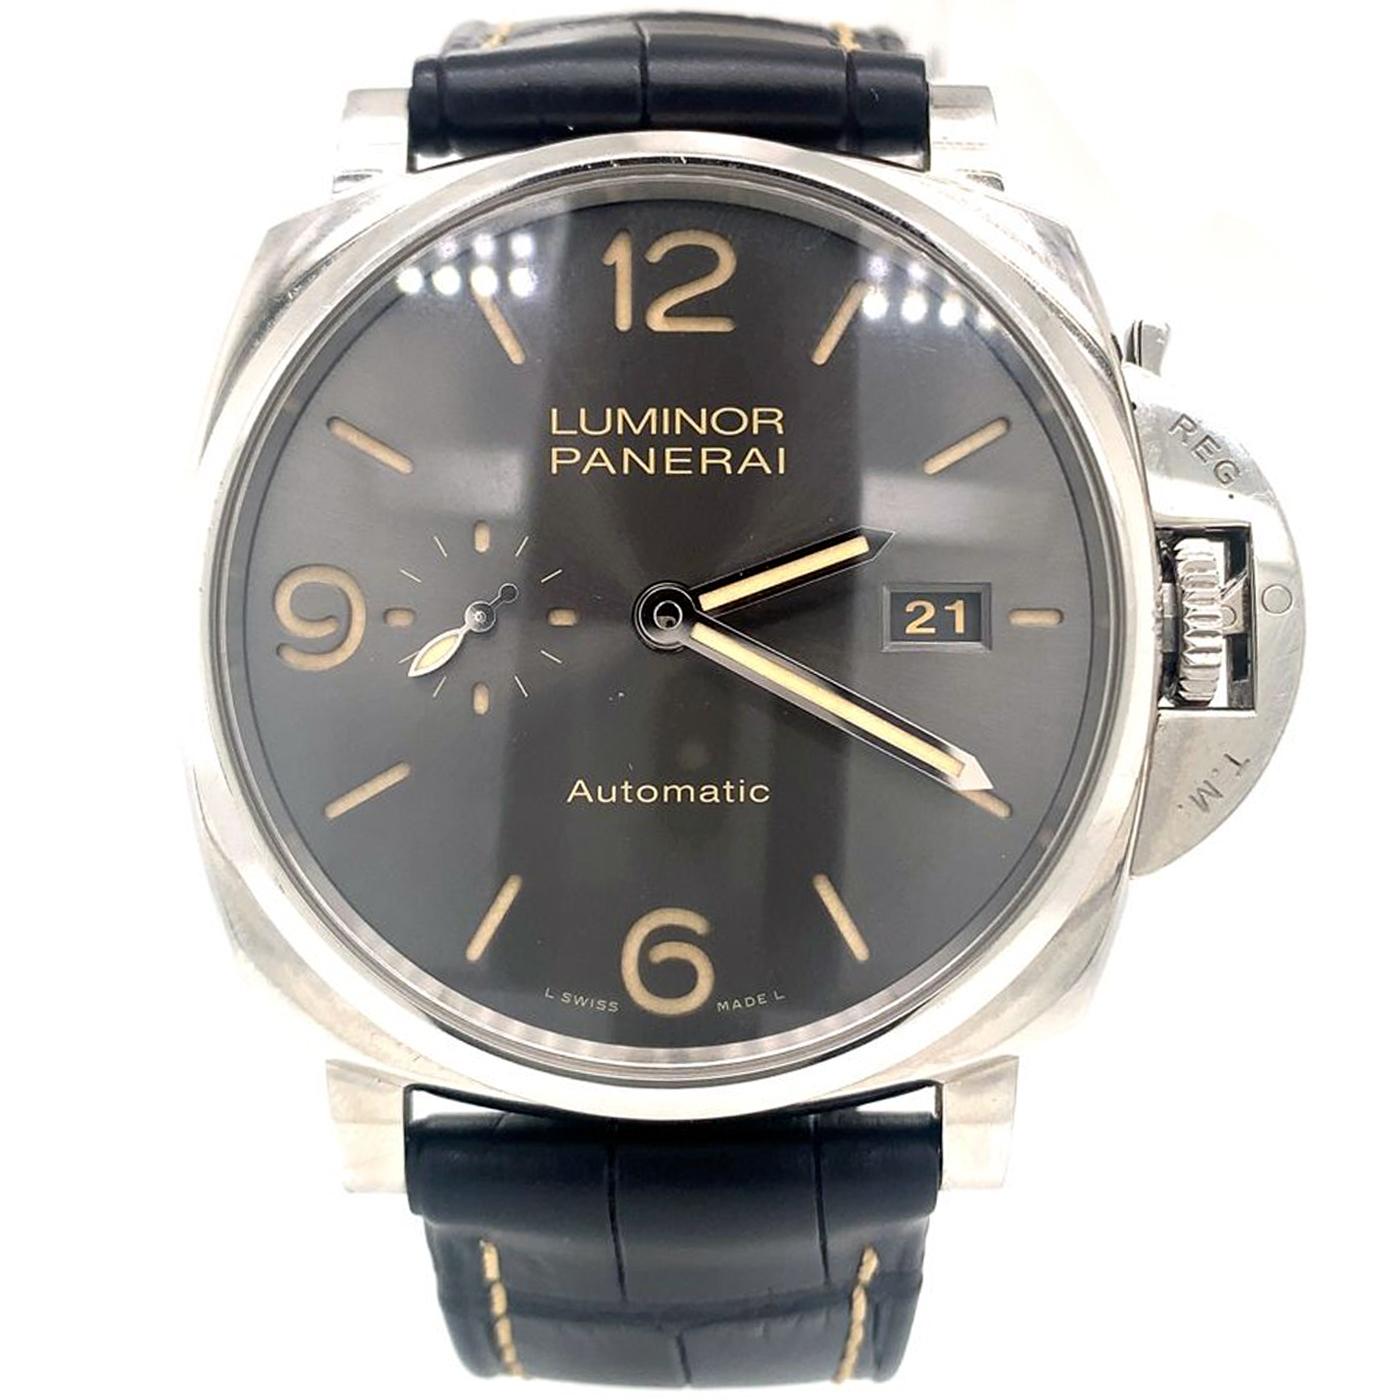 The Panerai Luminor Due Watch PAM00943 is an automatic watch that comes housed in a 45mm polished steel case with a matching steel bezel mounted on the top. Encased within it is an Anthracite sun-brushed dial. Protected by a sapphire crystal, the